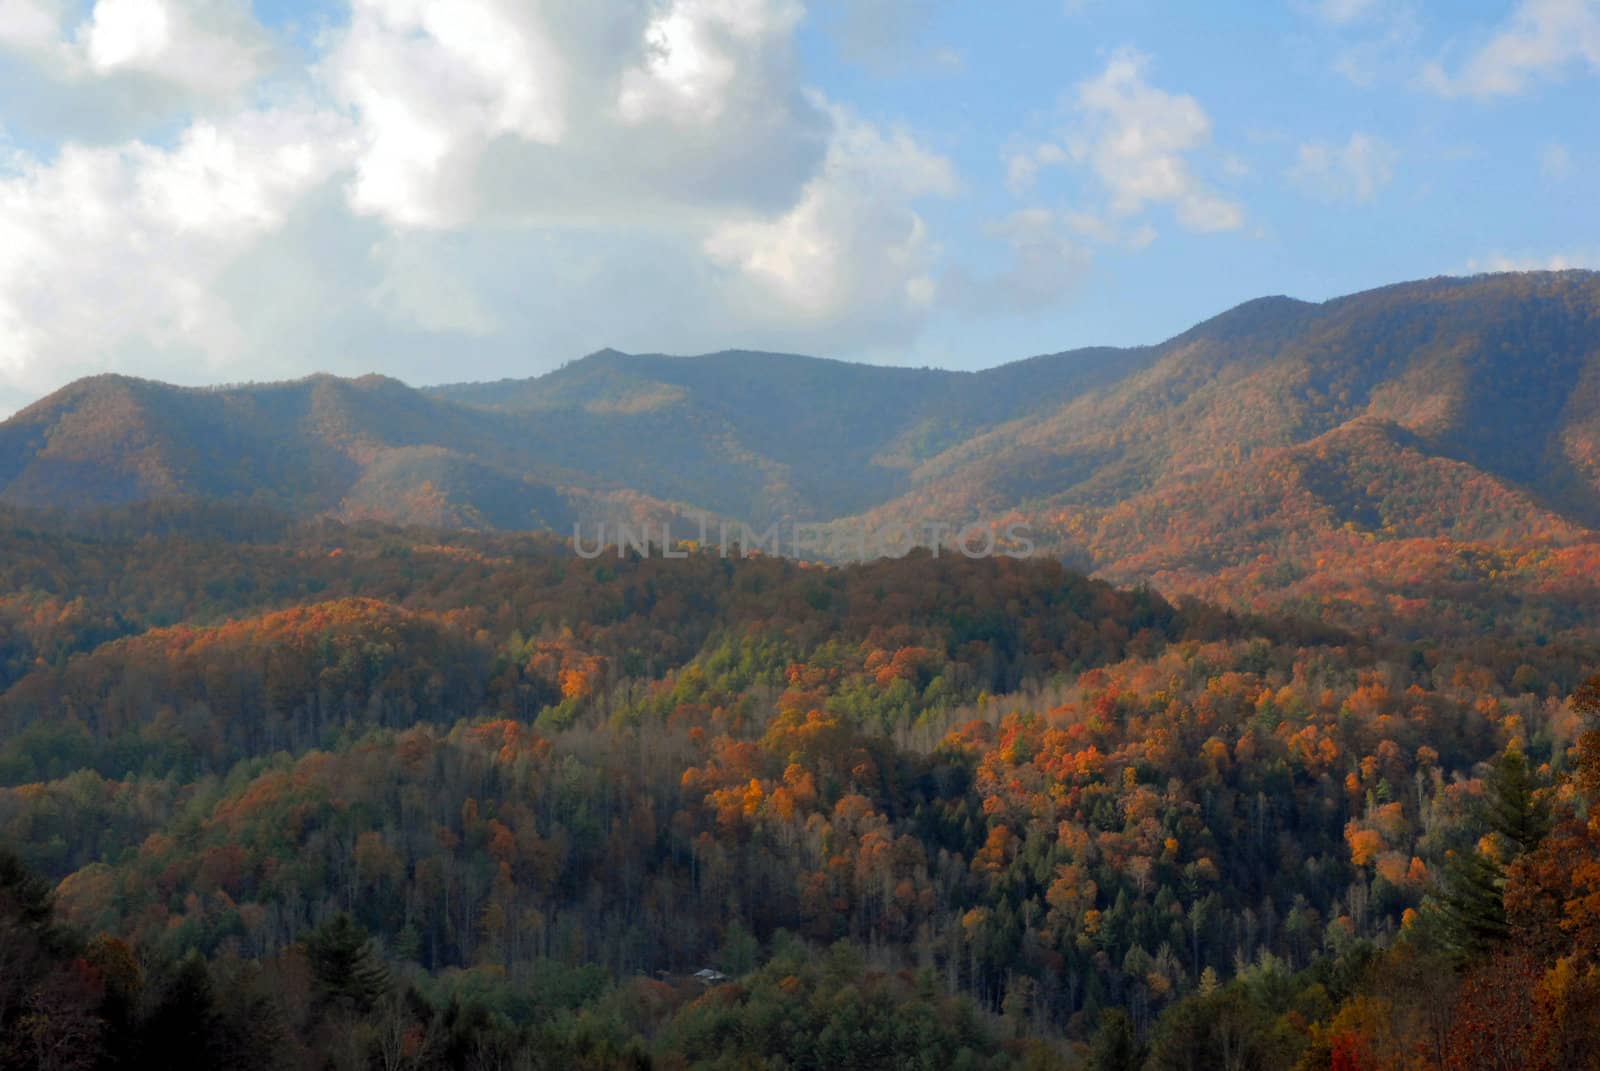 North Carolina in the Fall by RefocusPhoto